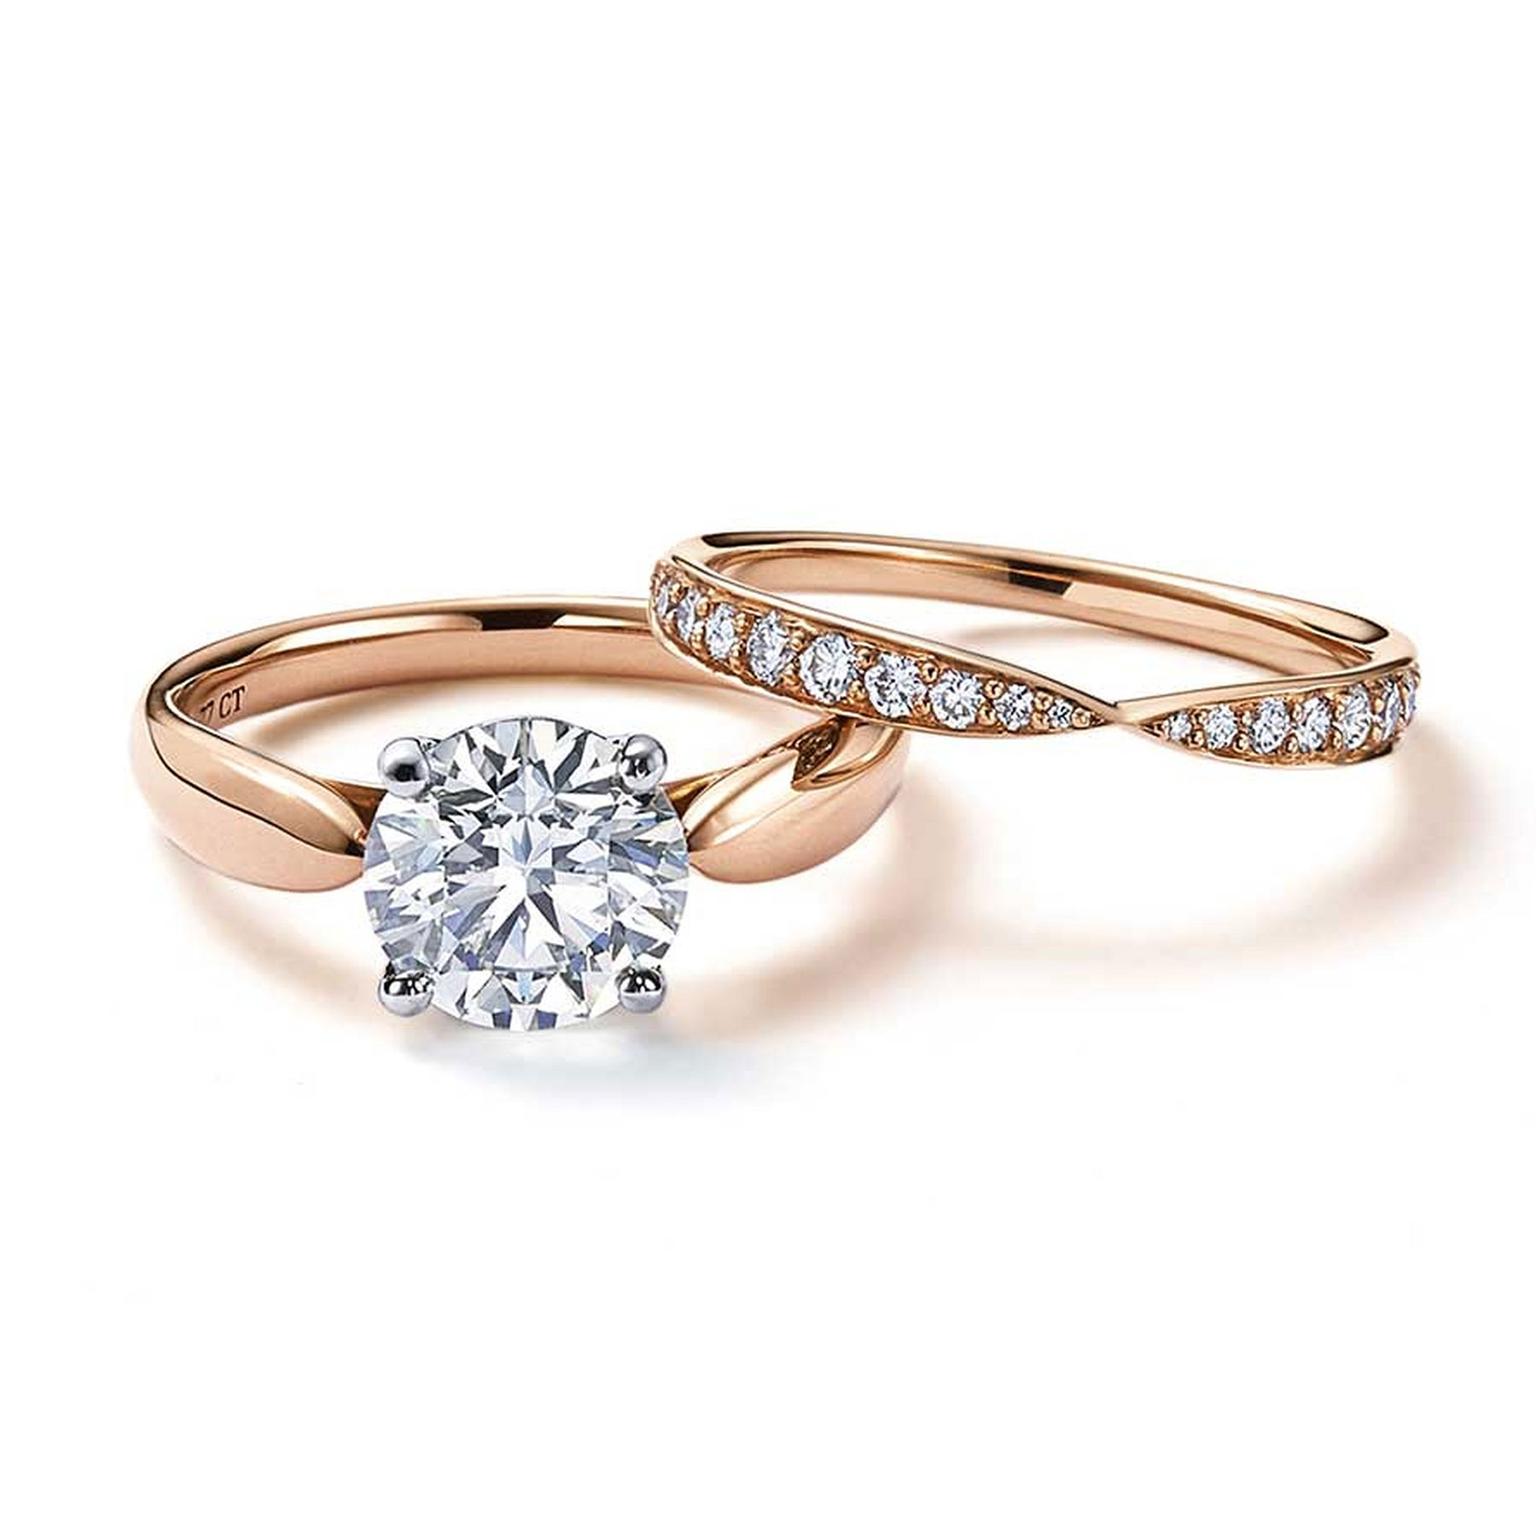 Harmony rose gold engagement ring with a central solitaire diamond ...